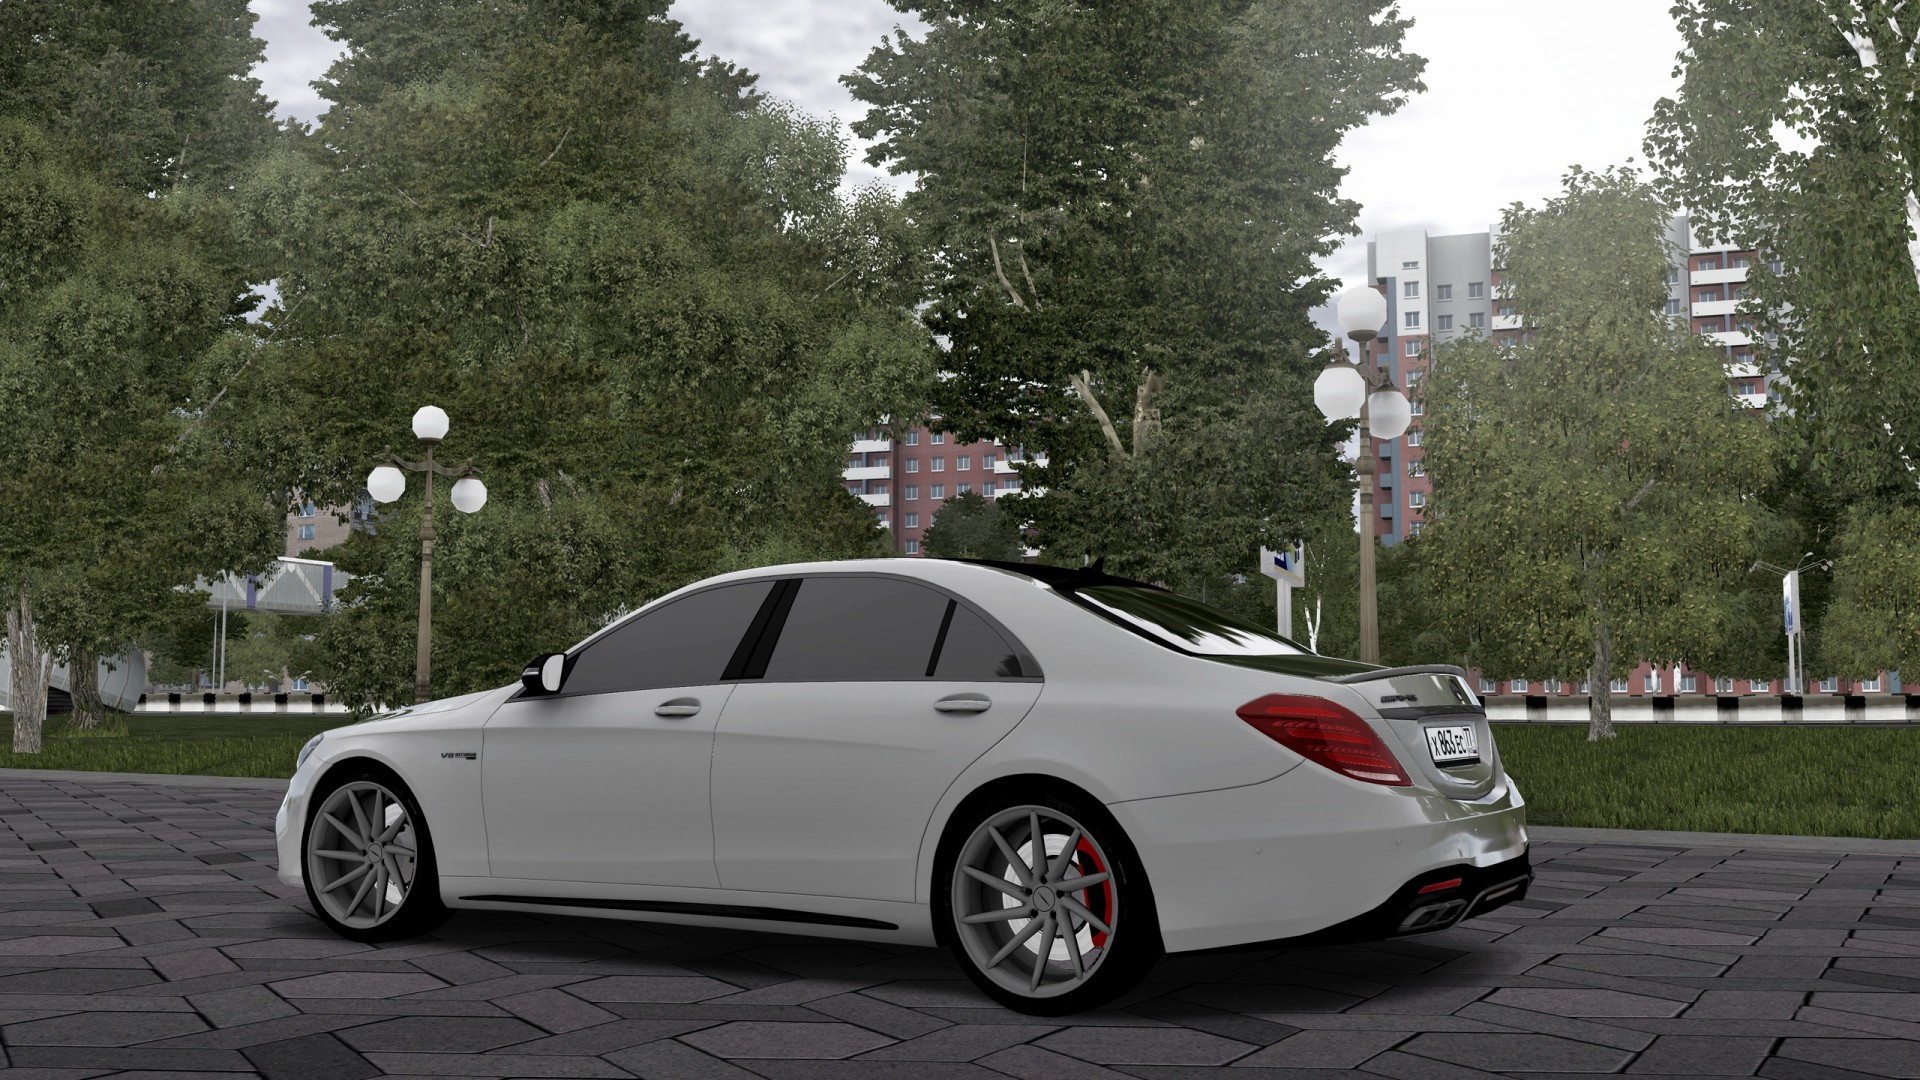 Beamng mod mercedes. Mercedes w222 s63 City car Driving. City car Driving моды Mercedes w222. Mercedes-Benz s-class w221 s550 City car Driving. Мерседес 222 Сити кар драйвинг.